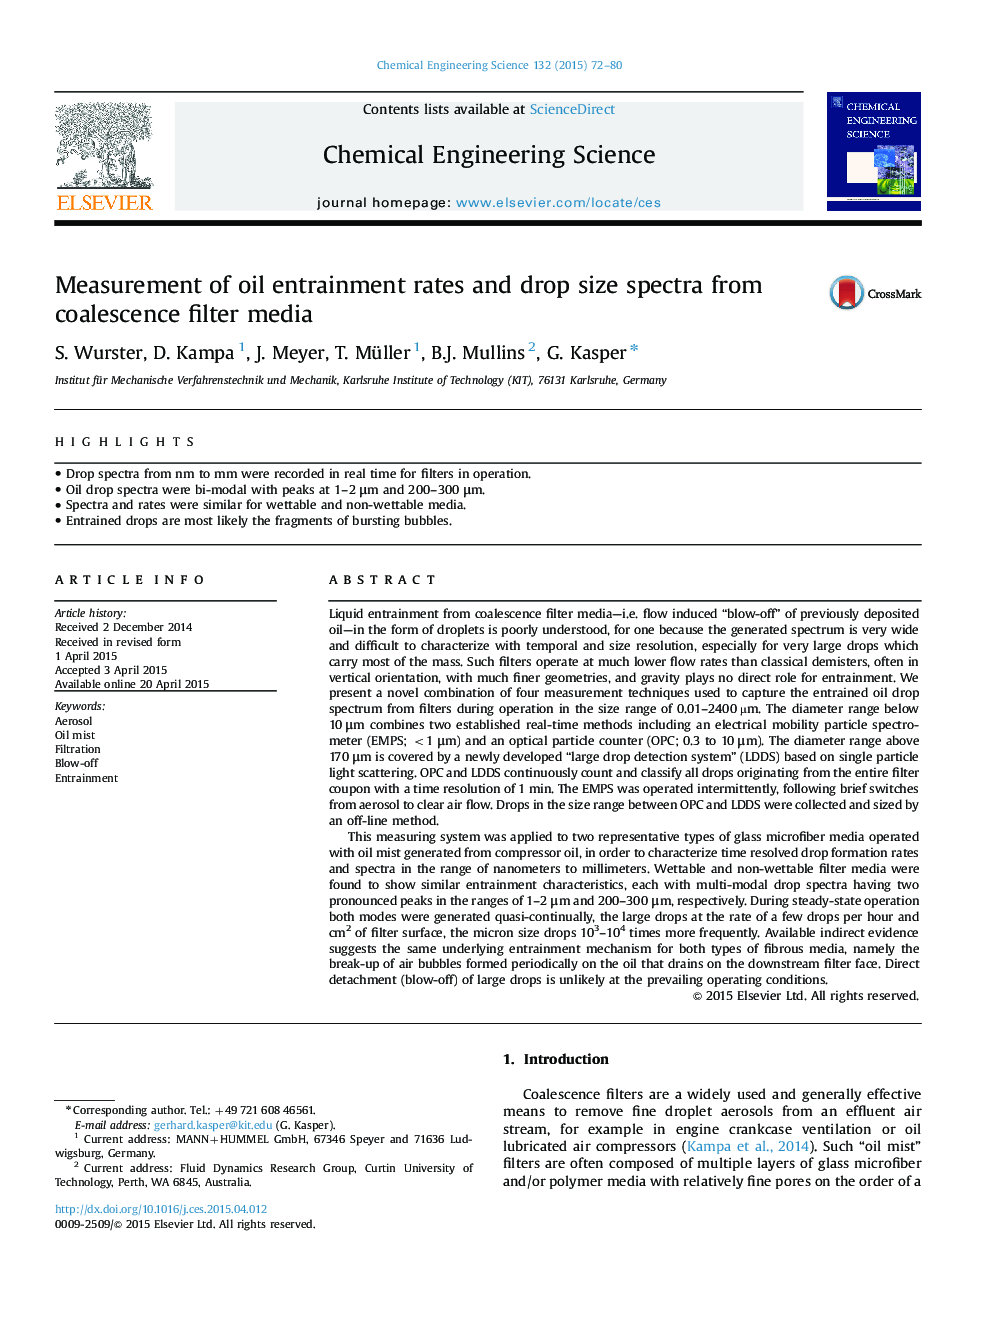 Measurement of oil entrainment rates and drop size spectra from coalescence filter media